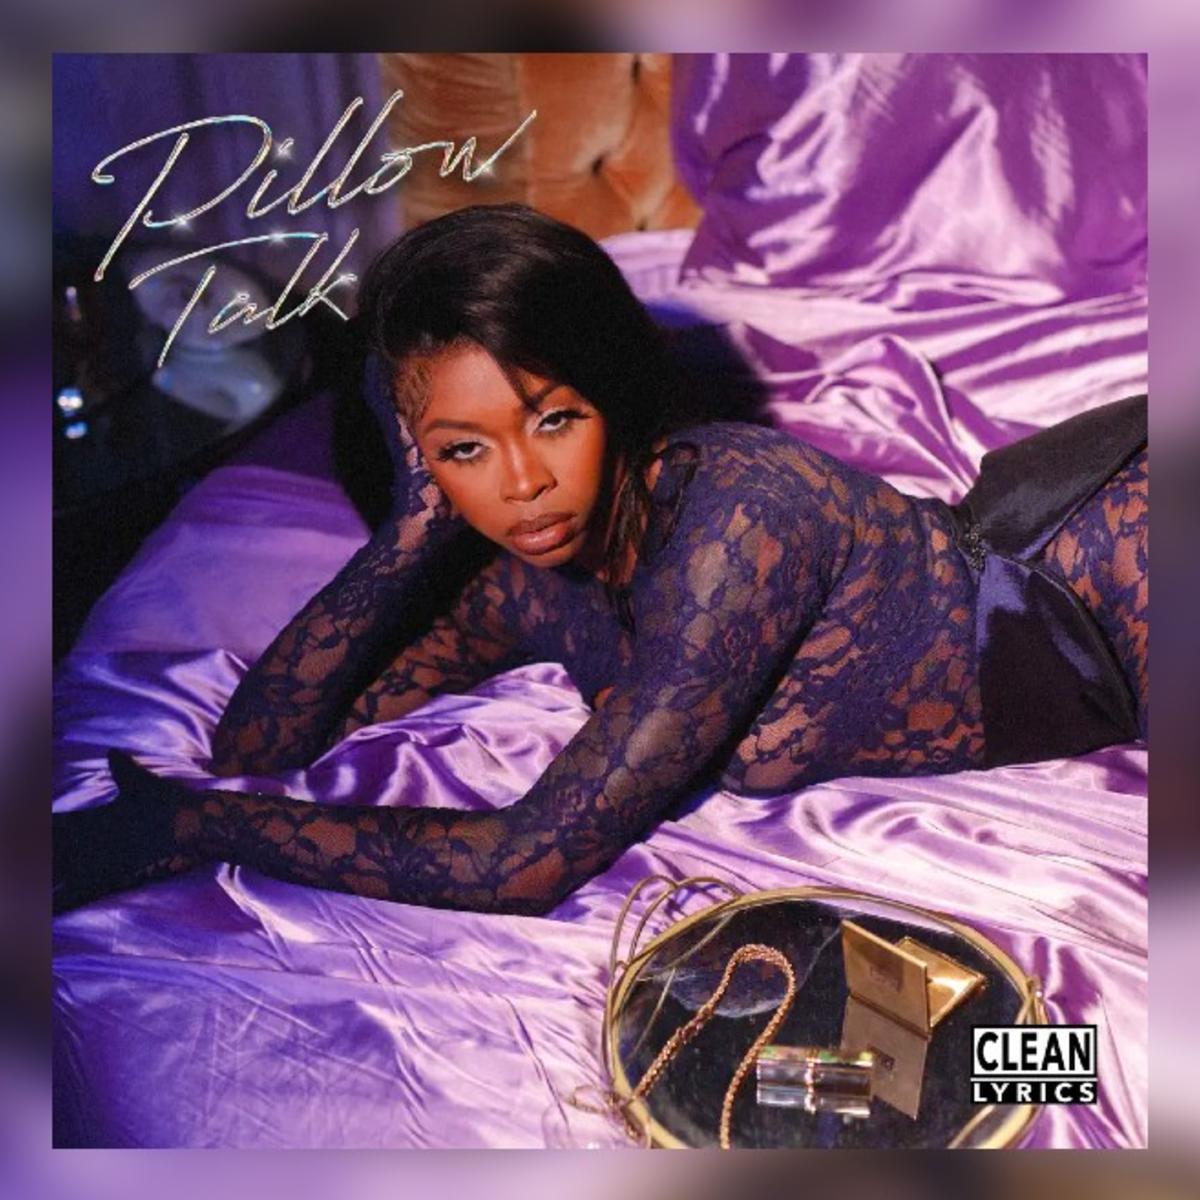 Listen To “Pillow Talk” By Tink